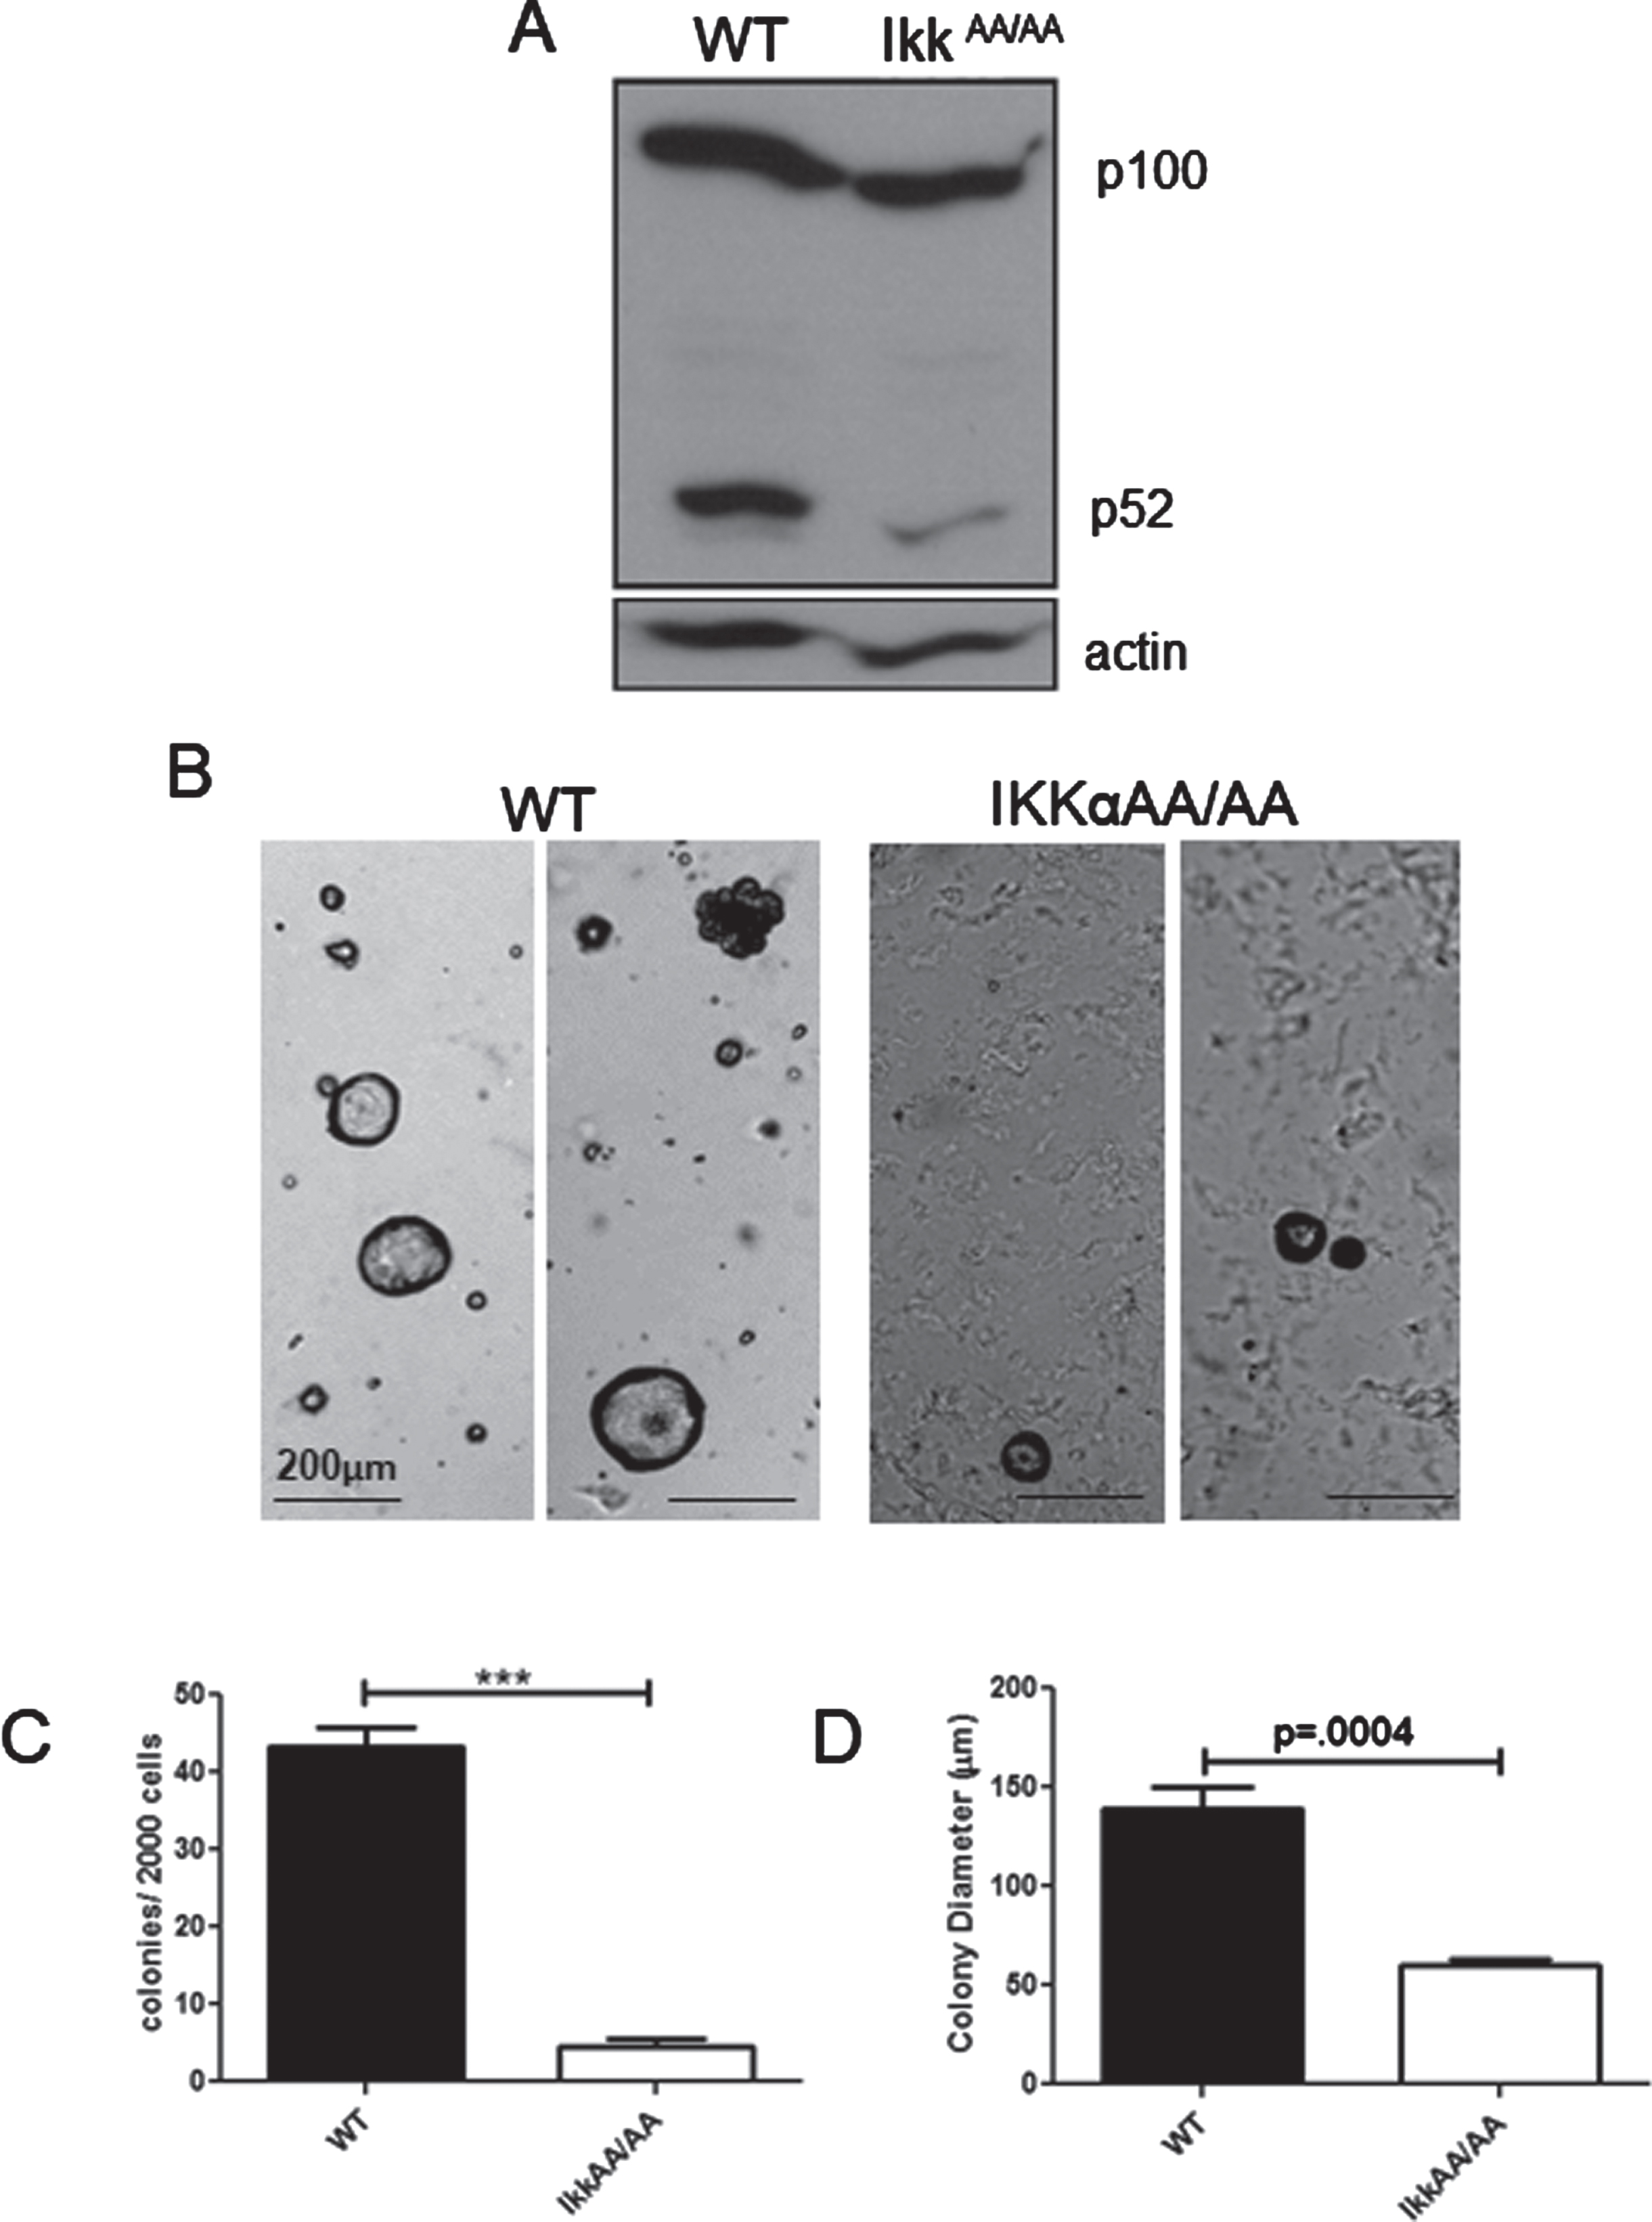 Attenuated colony formation by IkkαAA/AA mammary cells: A, Whole mammary glands from virgin WT and IkkαAA/AA mice were isolated and protein extracts immunoblotted to detect p100/p52. Actin was used as a loading control. B, WT and IkkαAA/AA mammary glands were isolated from 3 each 7-8 week old mice and linneg cells were subjected to Matrigel colony formation assays. Examples of luminal and basal (arrow) colonies are shown form both mice. Bars are 200μm. C, Colonies per 2000 seeded cells were counted and D, colony diameters measured. Statistical analyses: unpaired t-tests ***p < 0.0001.